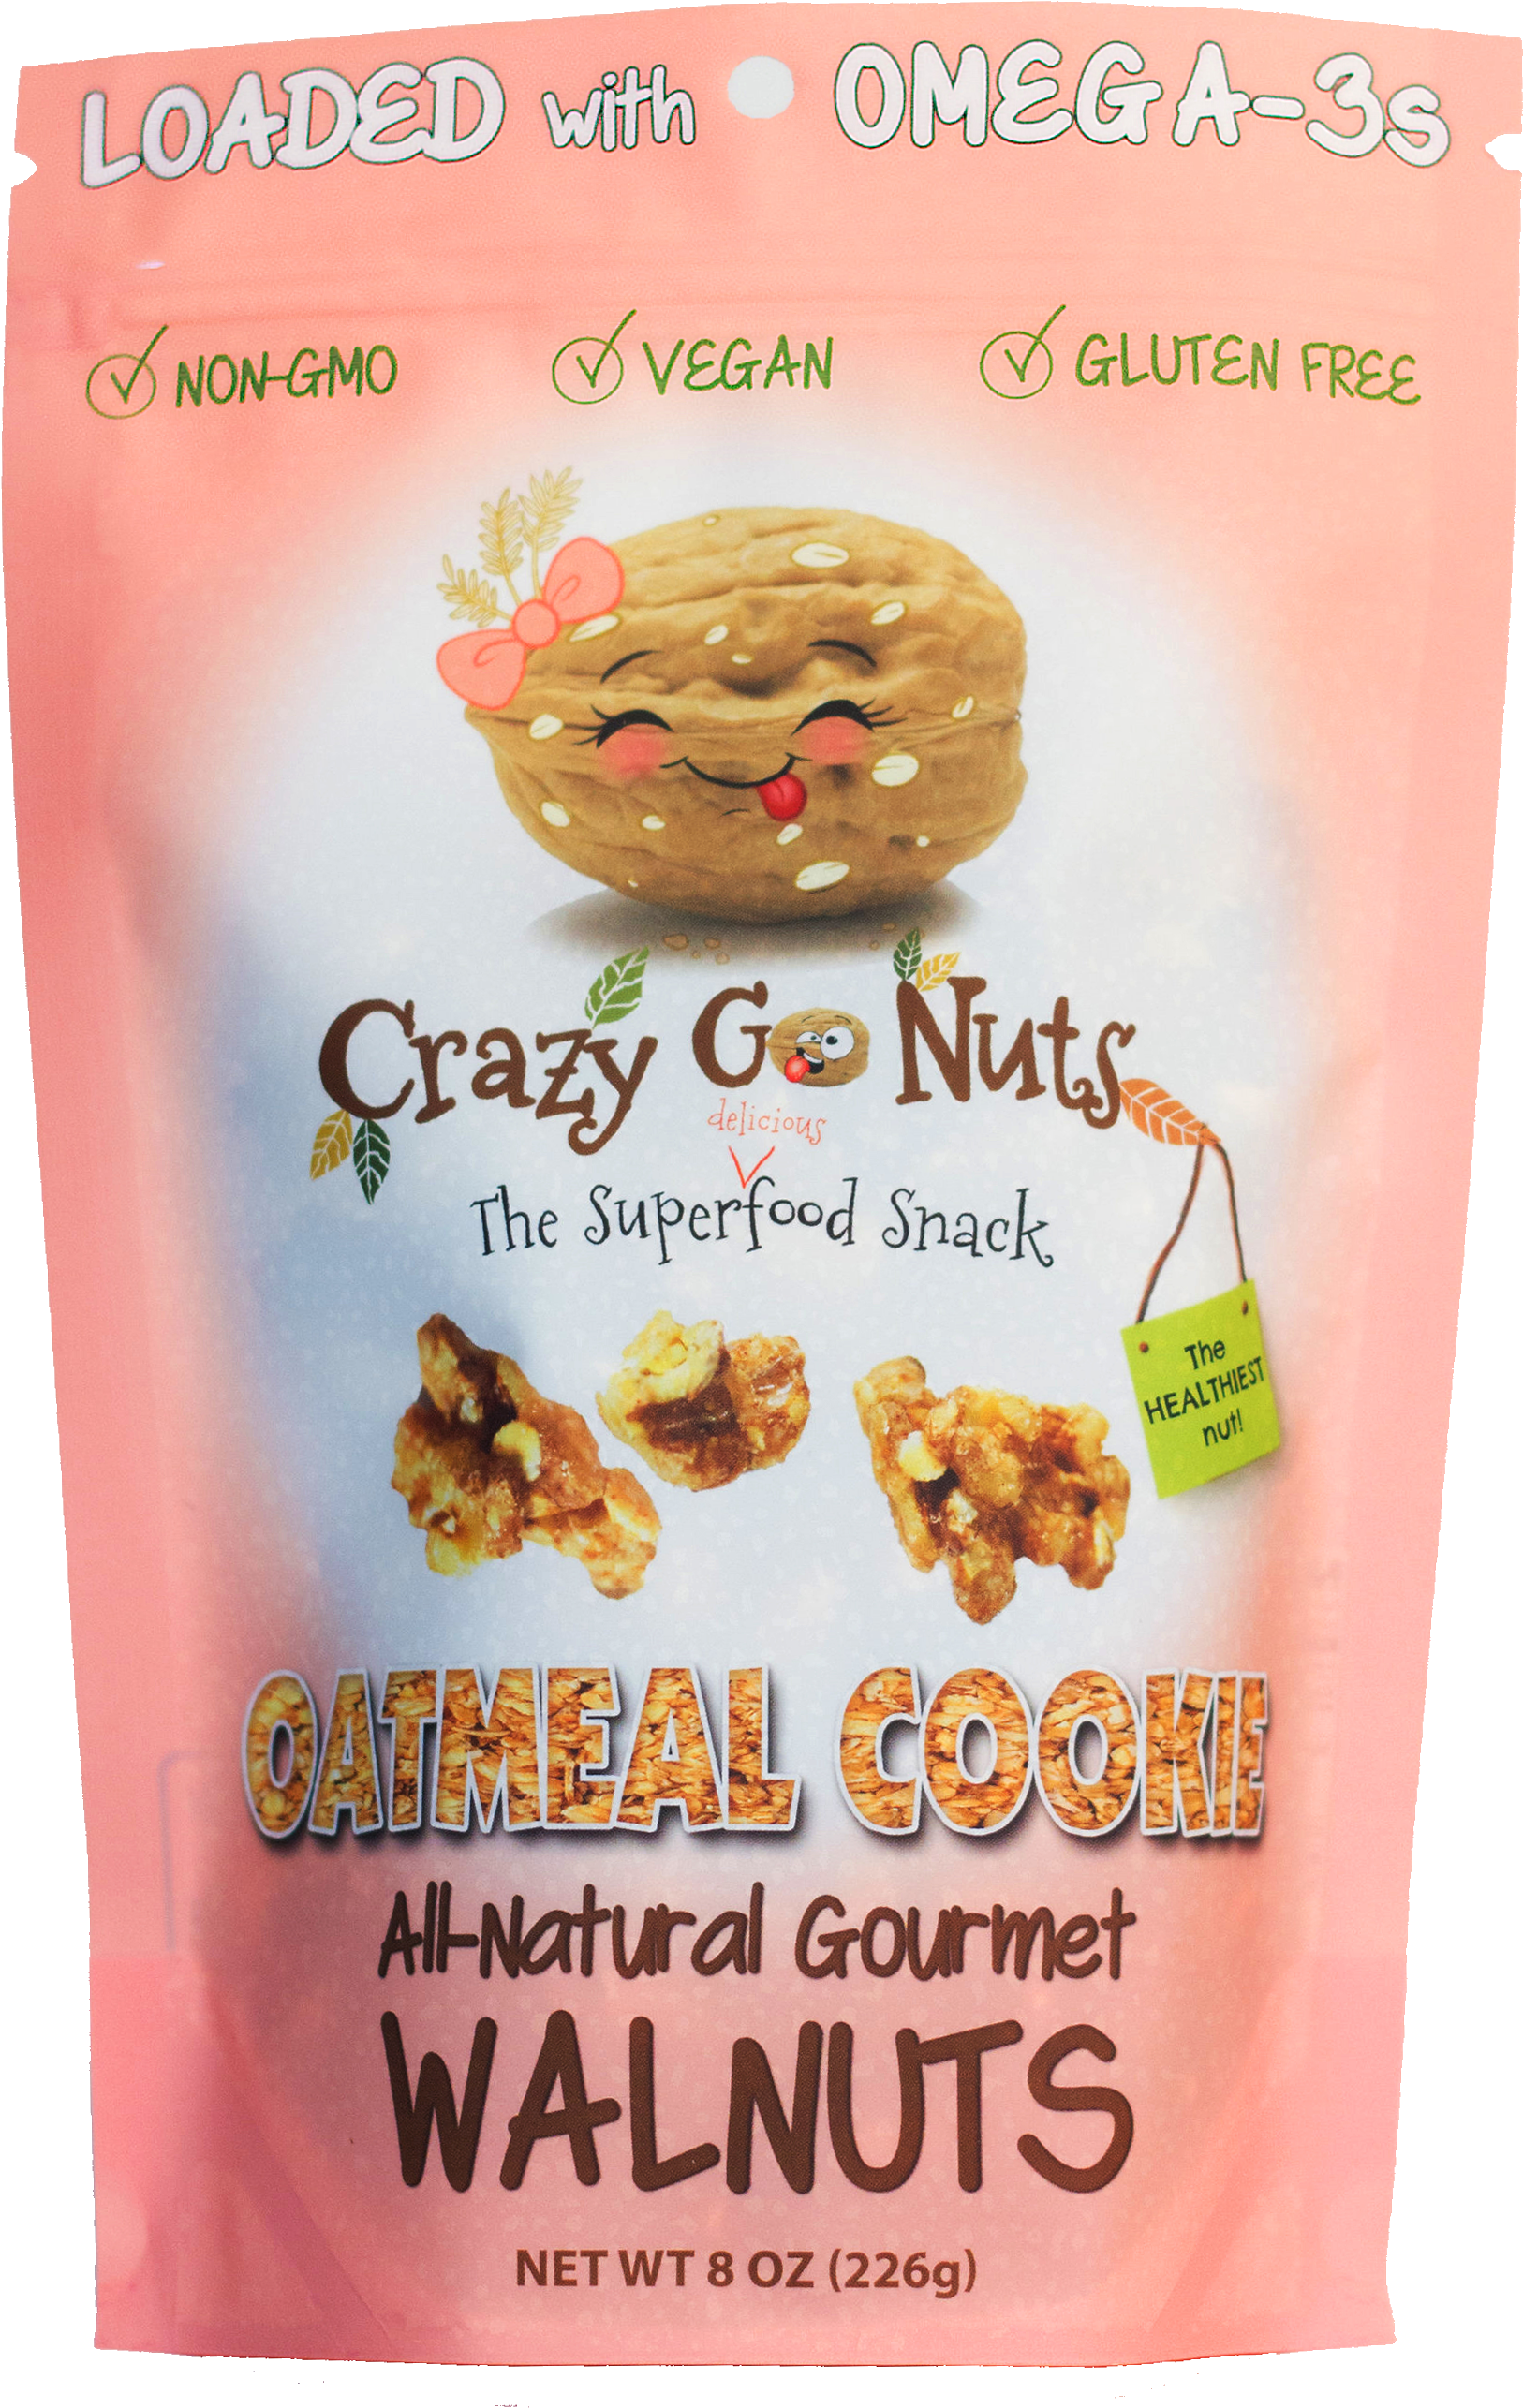 Crazy Go Nuts Oatmeal Cookie Walnuts Package